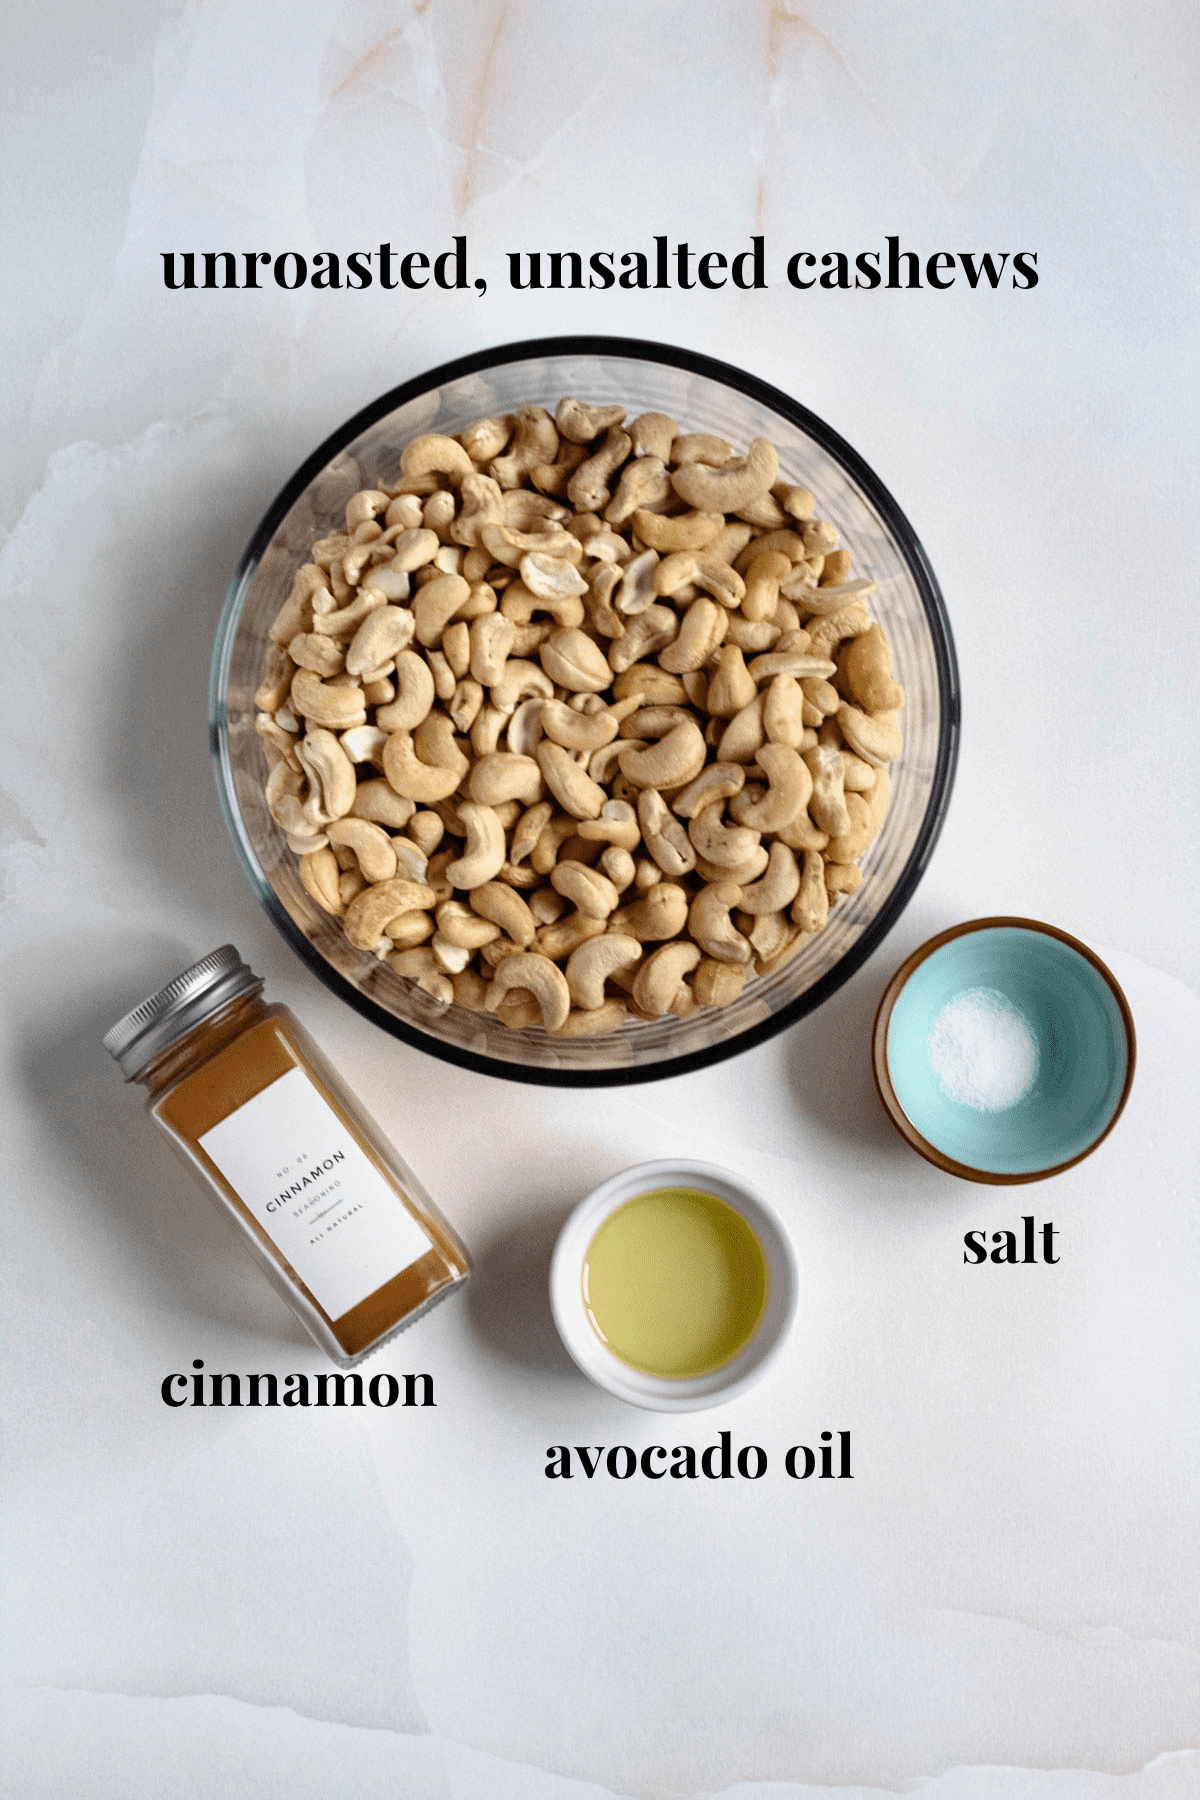 cashew butter ingredients on a light colored background